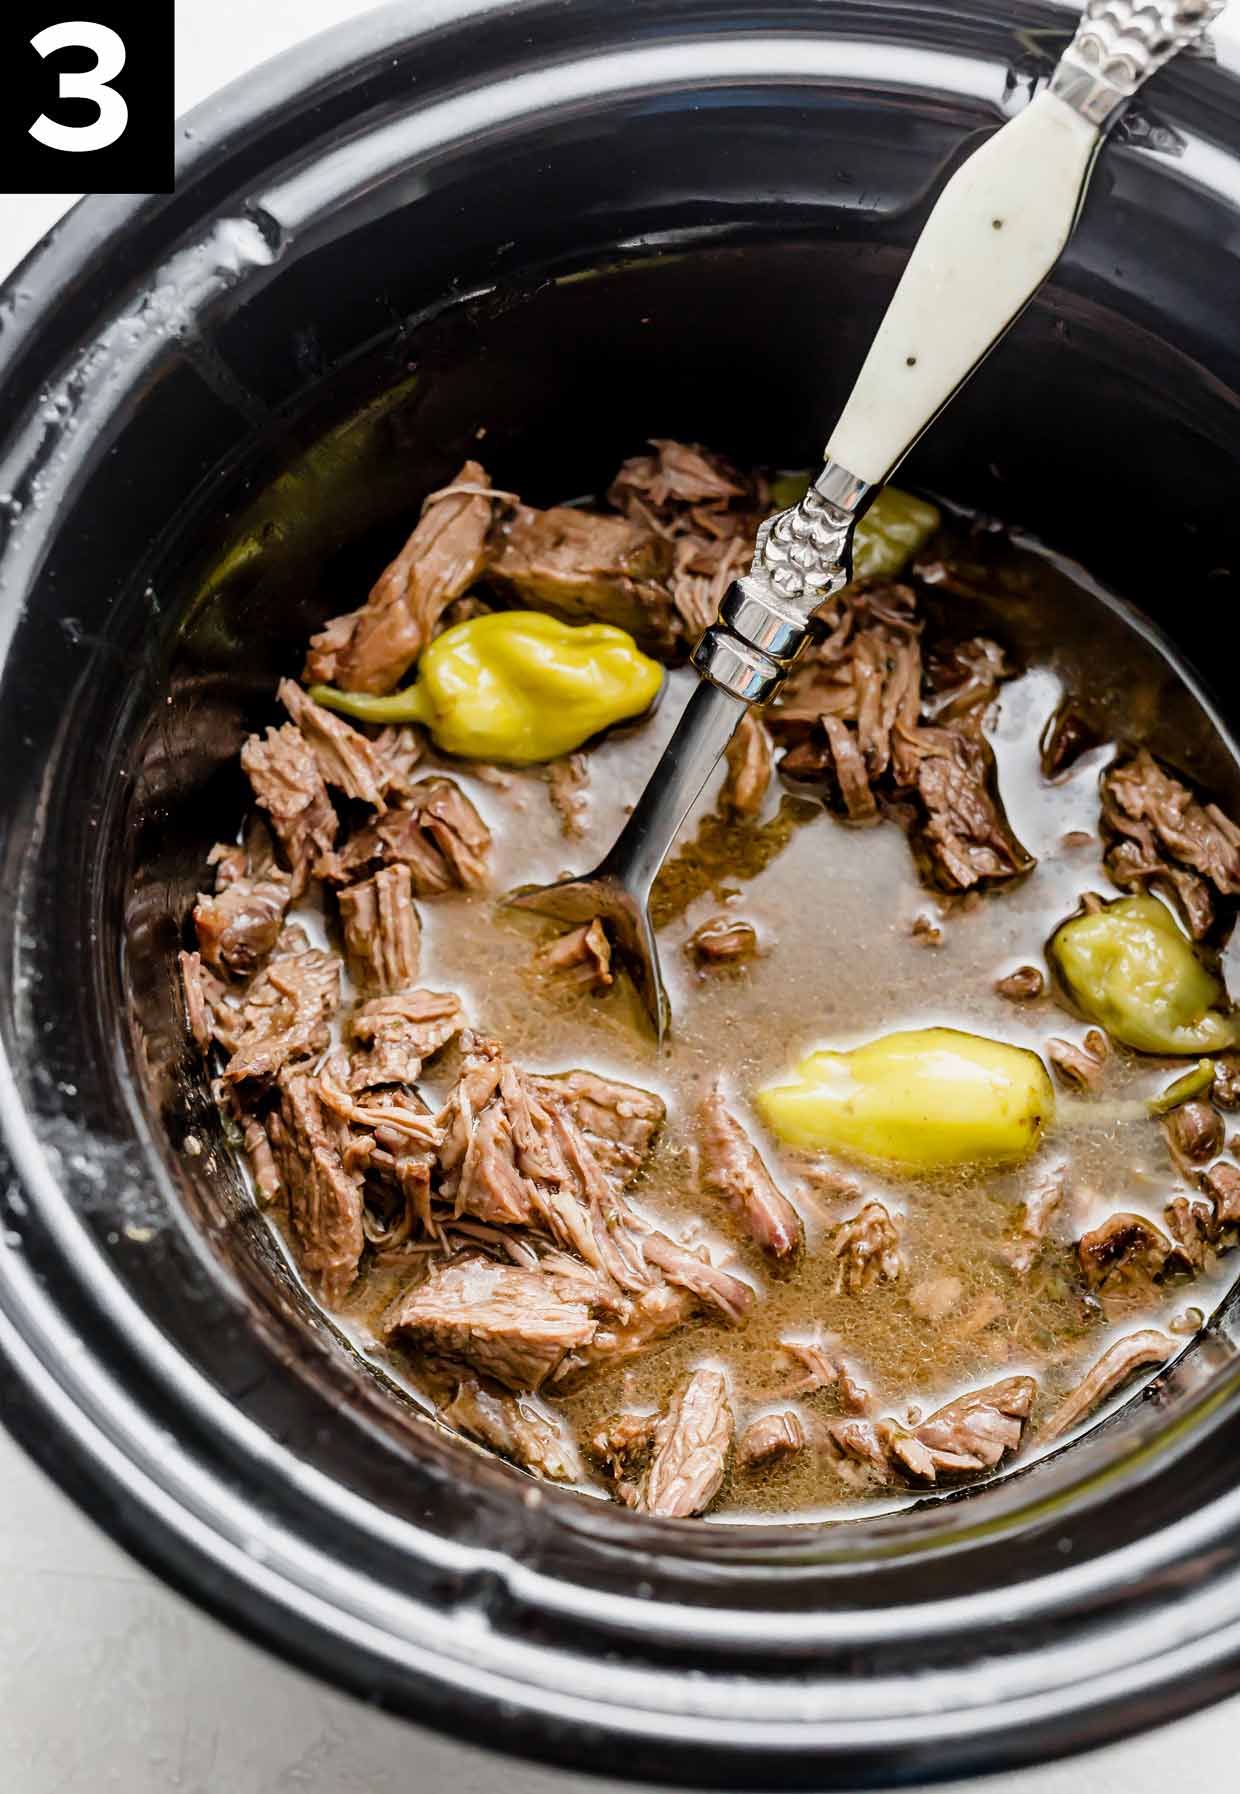 Crock pot Mississippi Pot Roast in a black slow cooker with pepperoncini peppers amongst the meat.